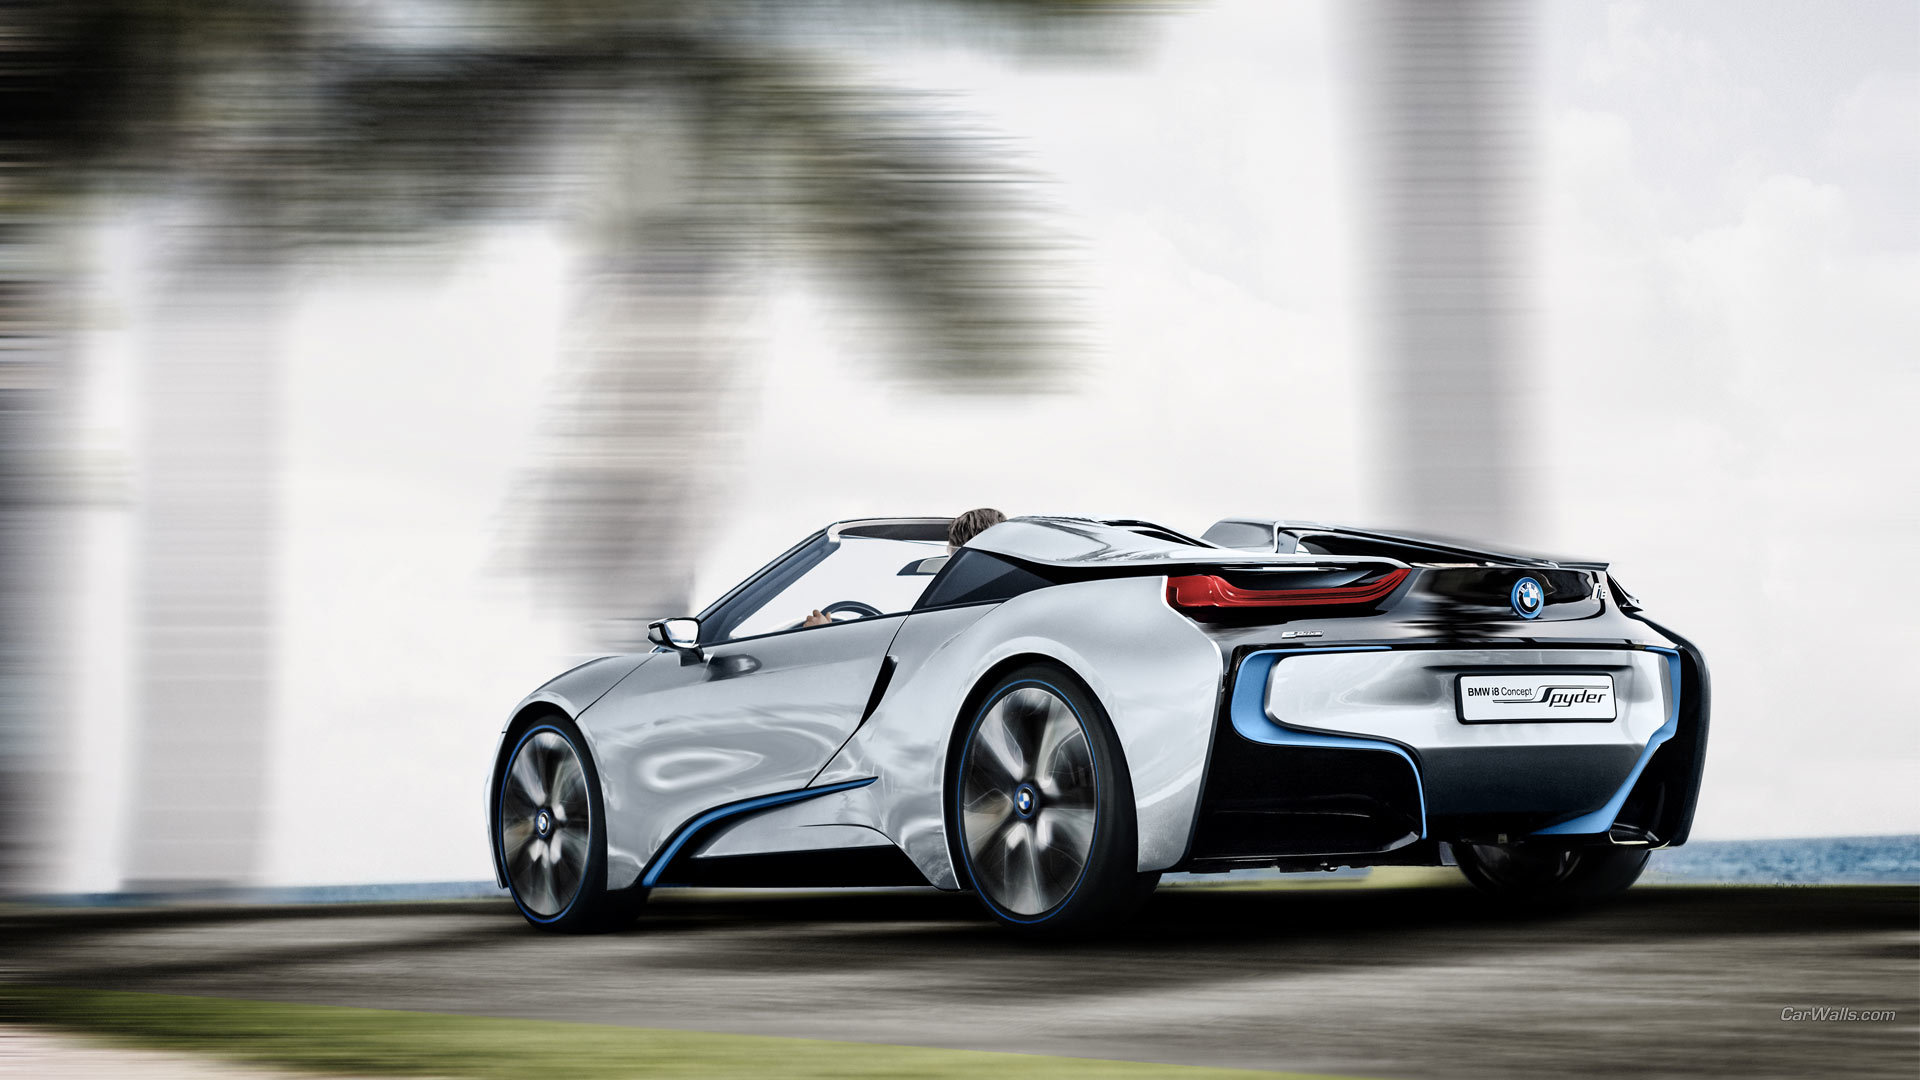 Awesome BMW I8 free wallpaper ID:126985 for hd 1920x1080 computer